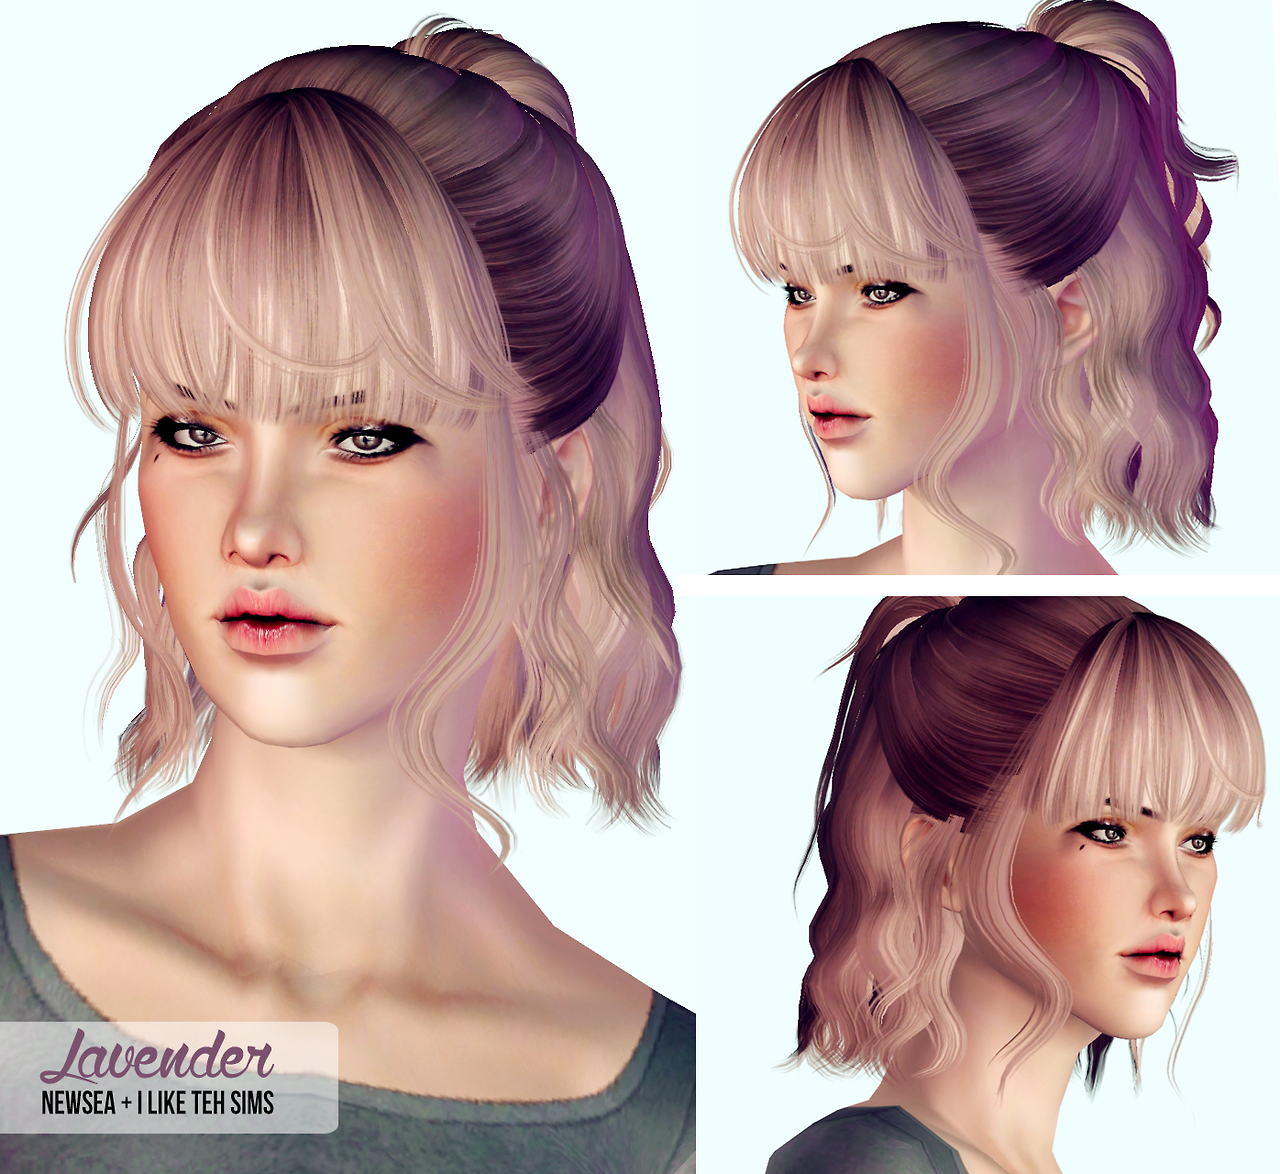 Where To Download Sims 3 Hair